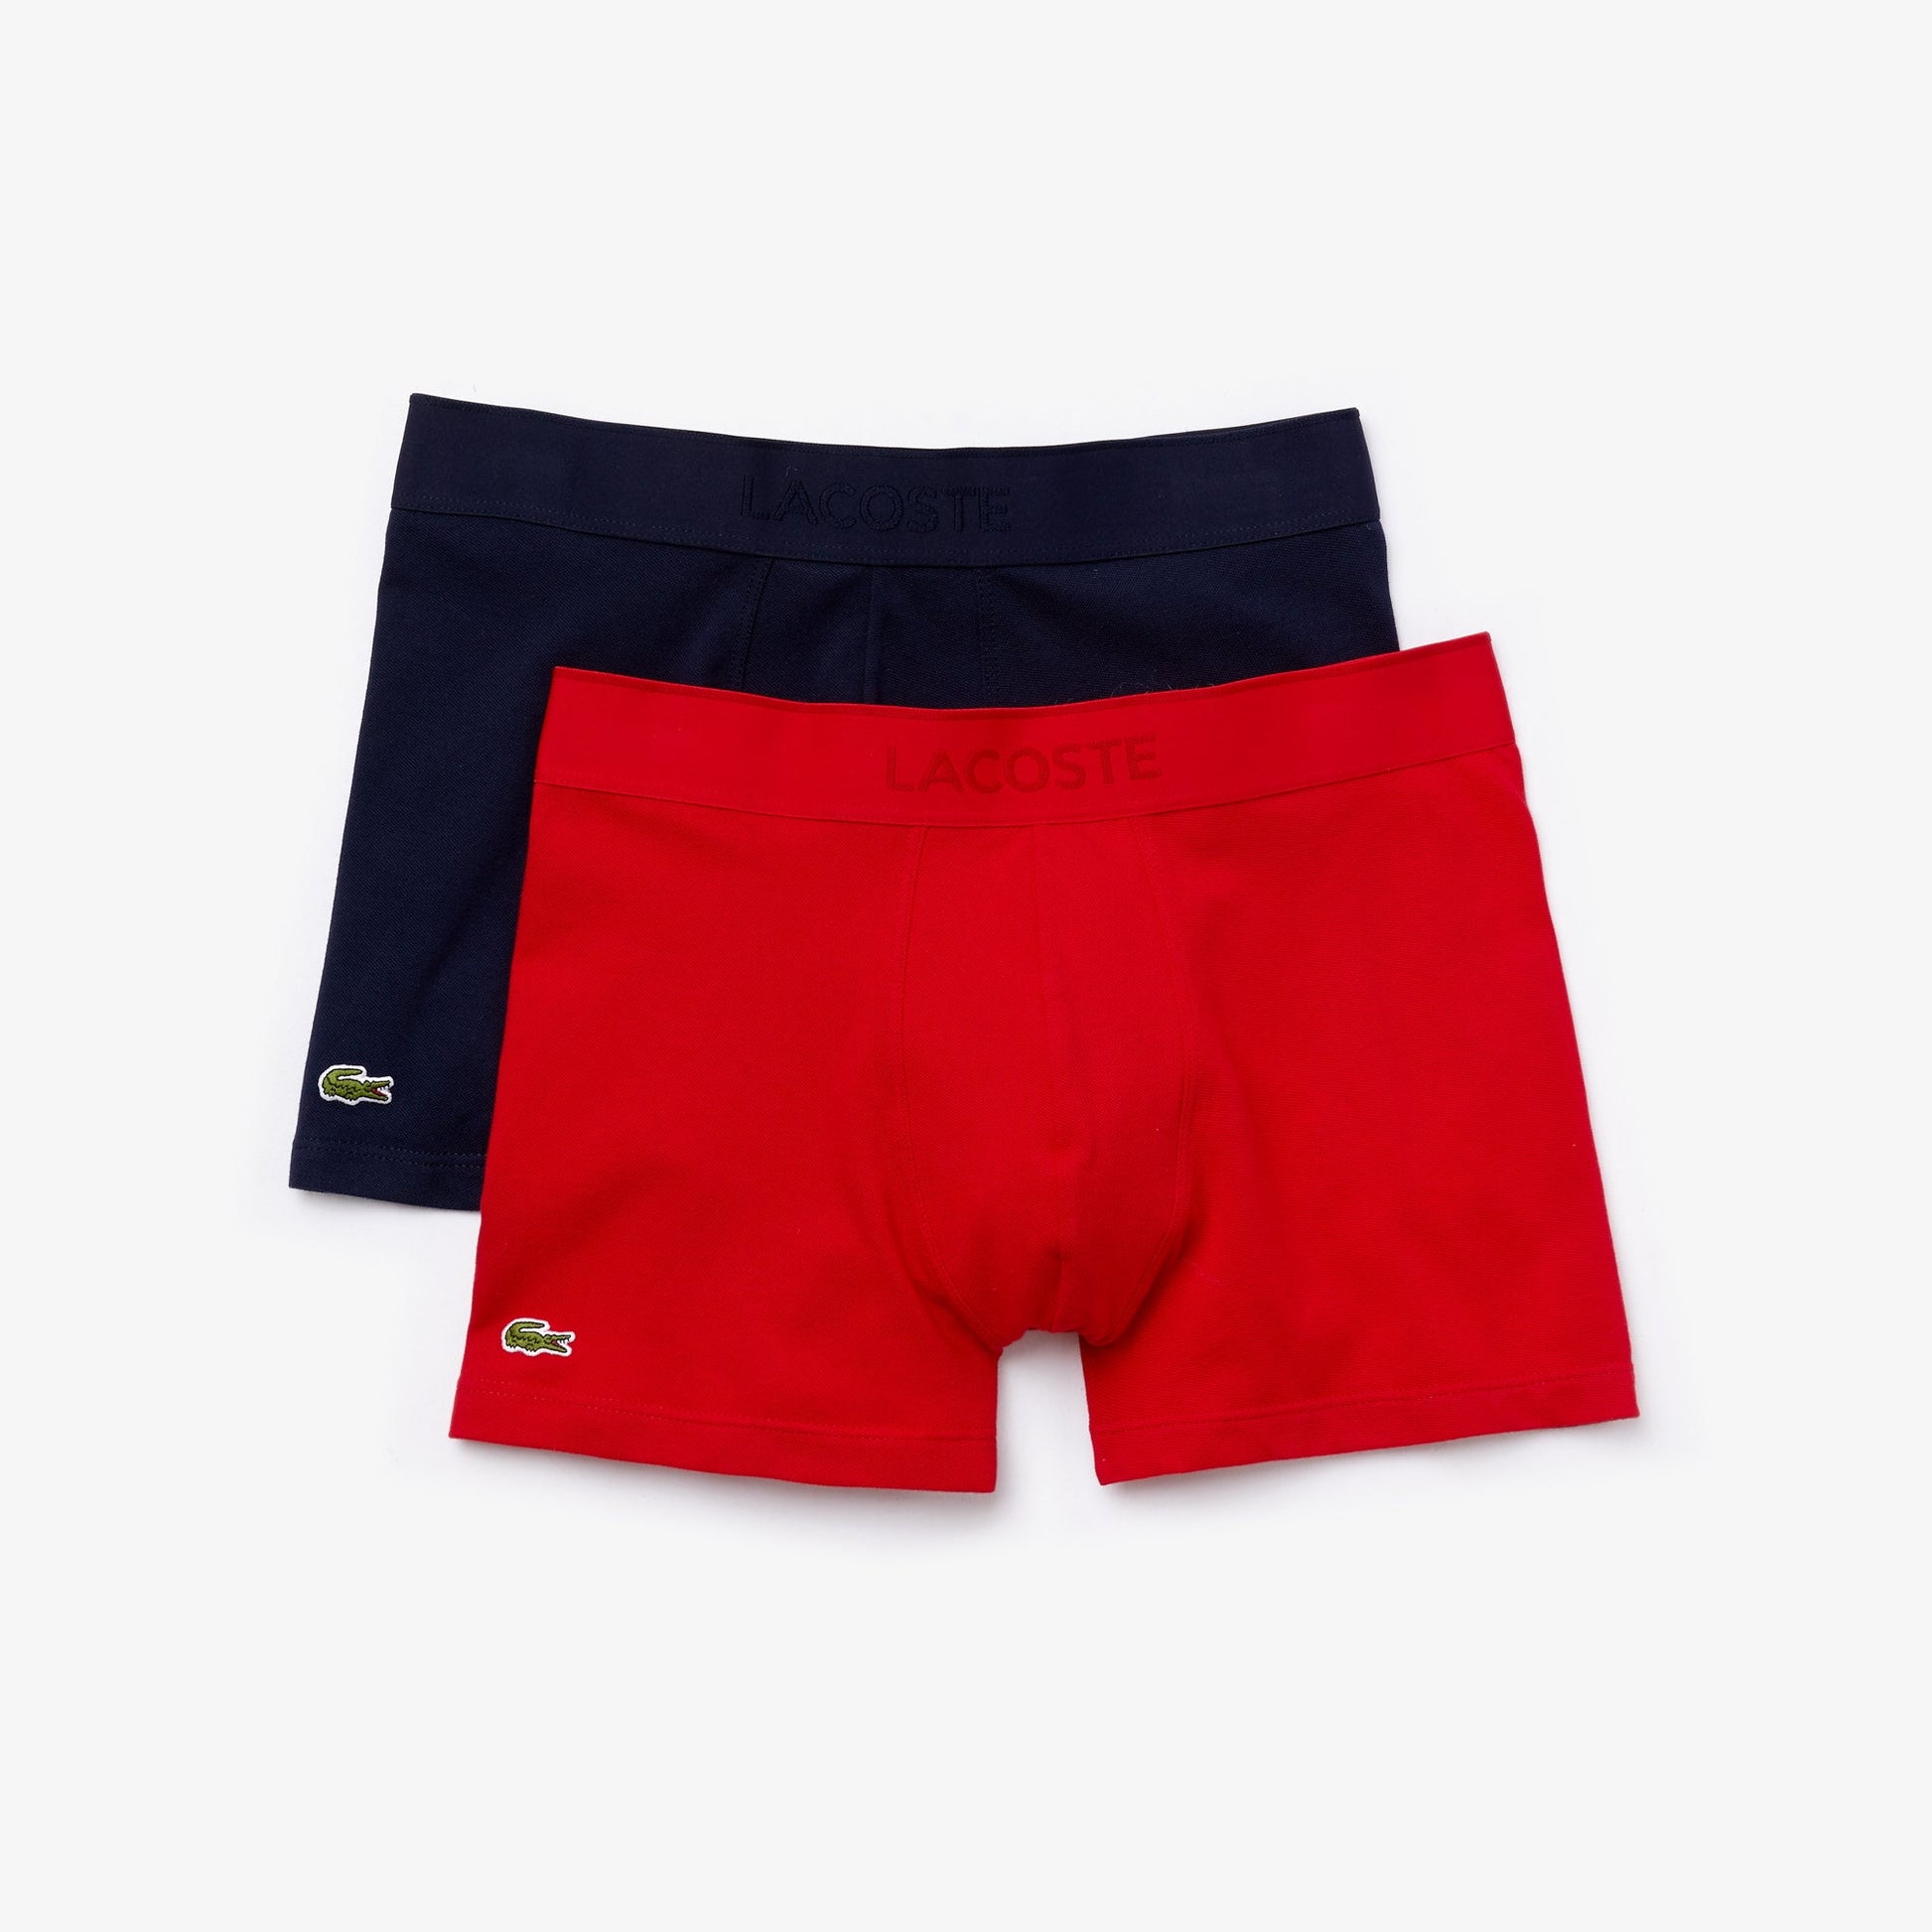 Shop The Latest Collection Of Lacoste Pack Of 2 Pique Boxer Briefs L.12.12 - 5H3378 In Lebanon